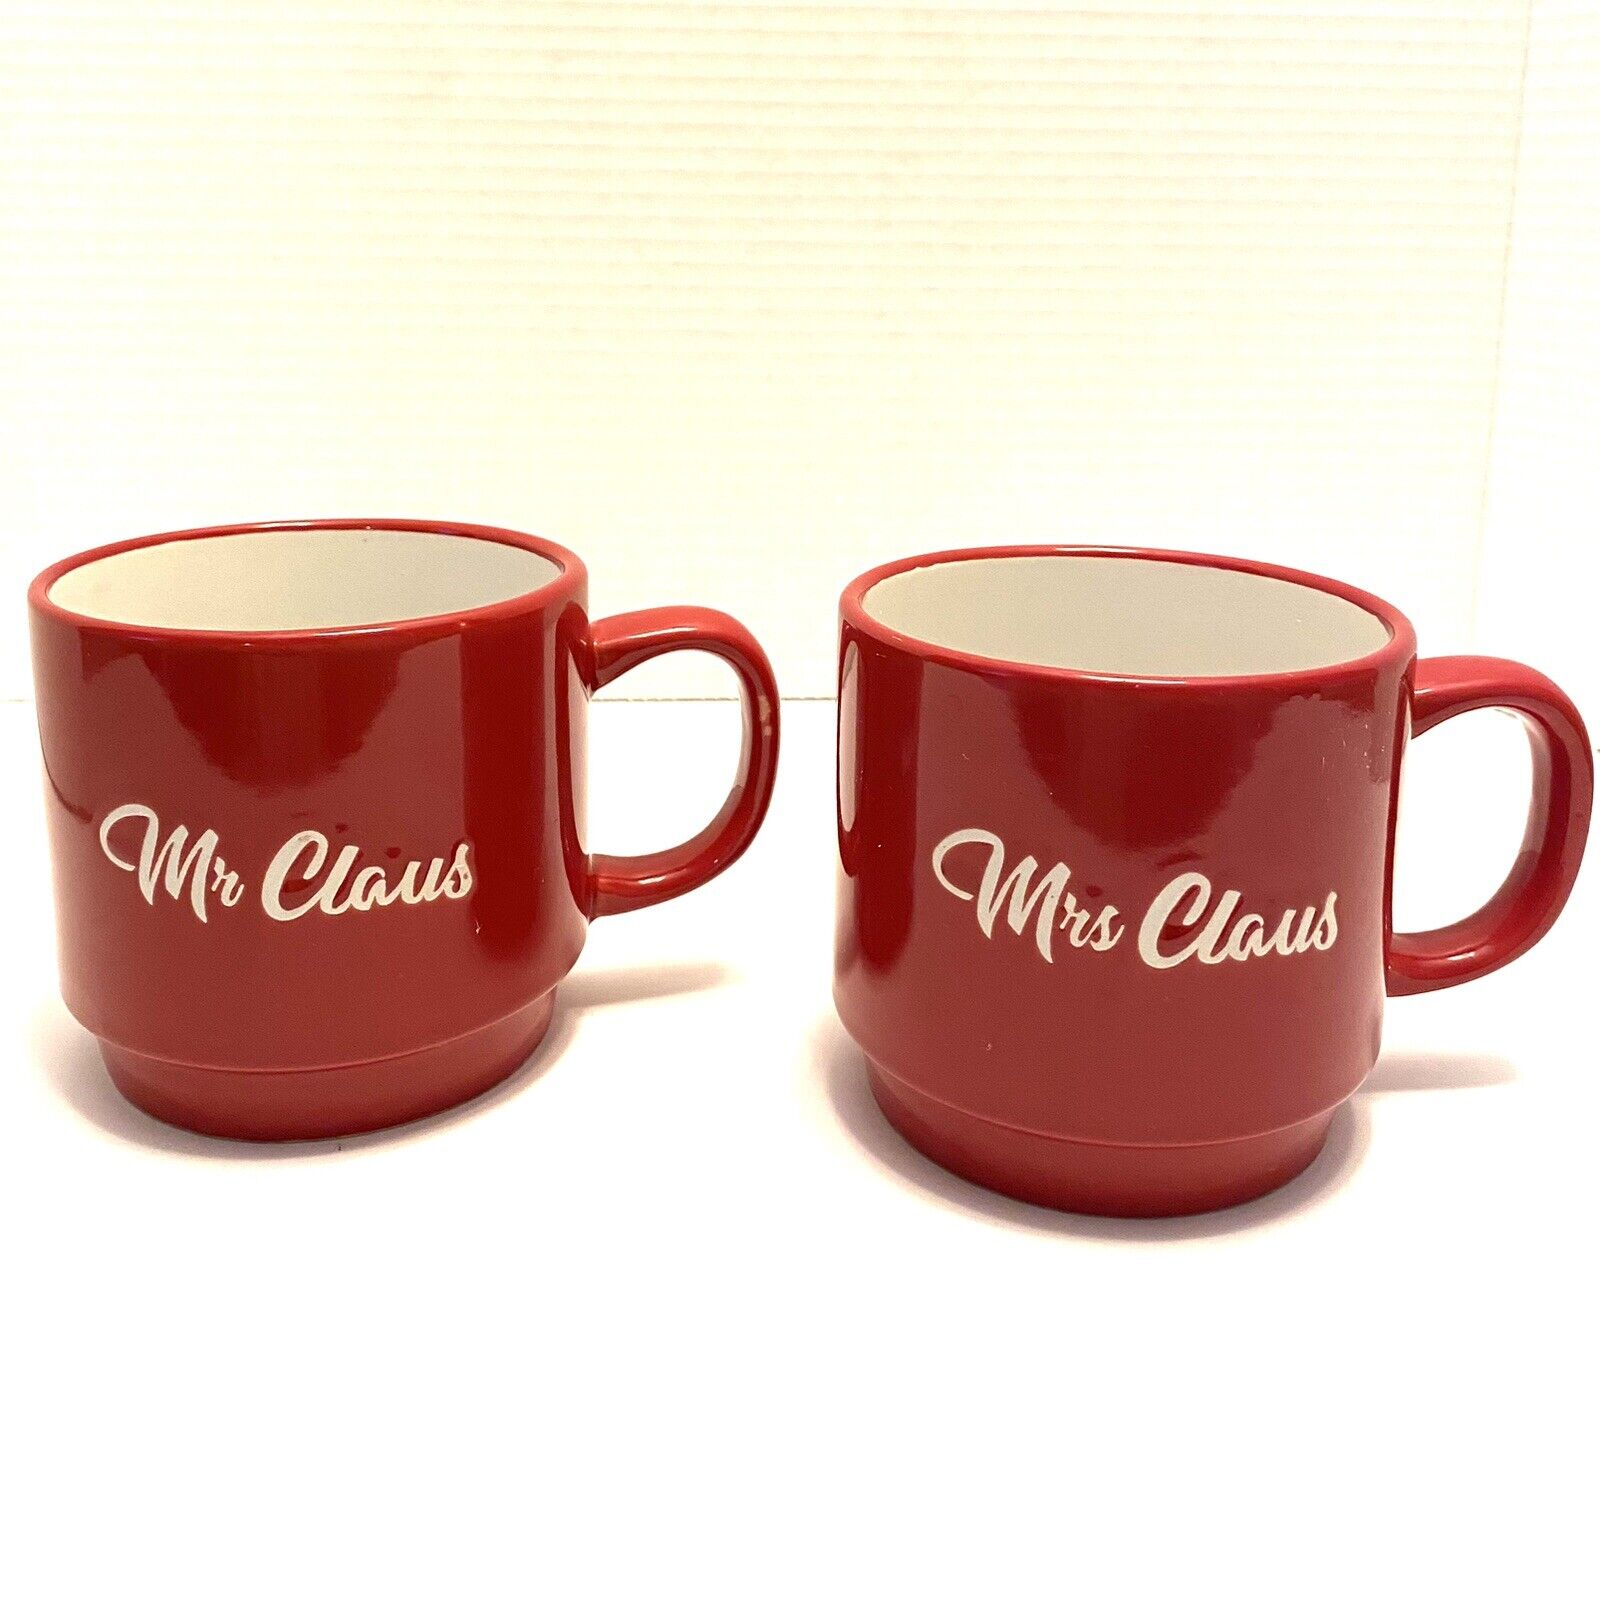 Lot Of 2 Mugs Mr Claus And Mrs Claus Christmas Holiday Coffee Tea Red Cups New